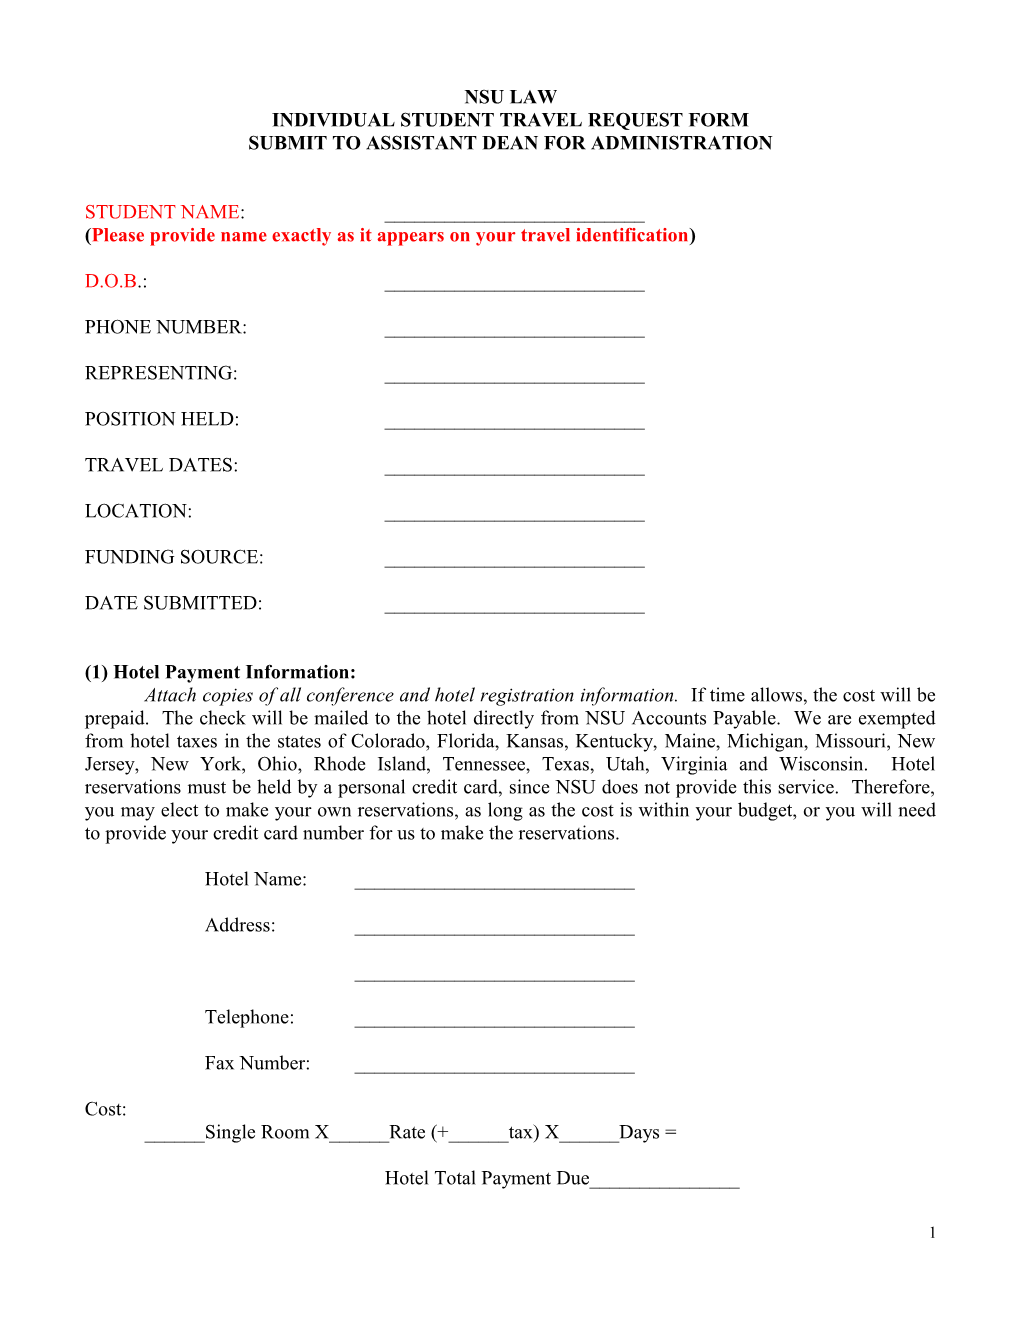 Individual Student Travel Request Form